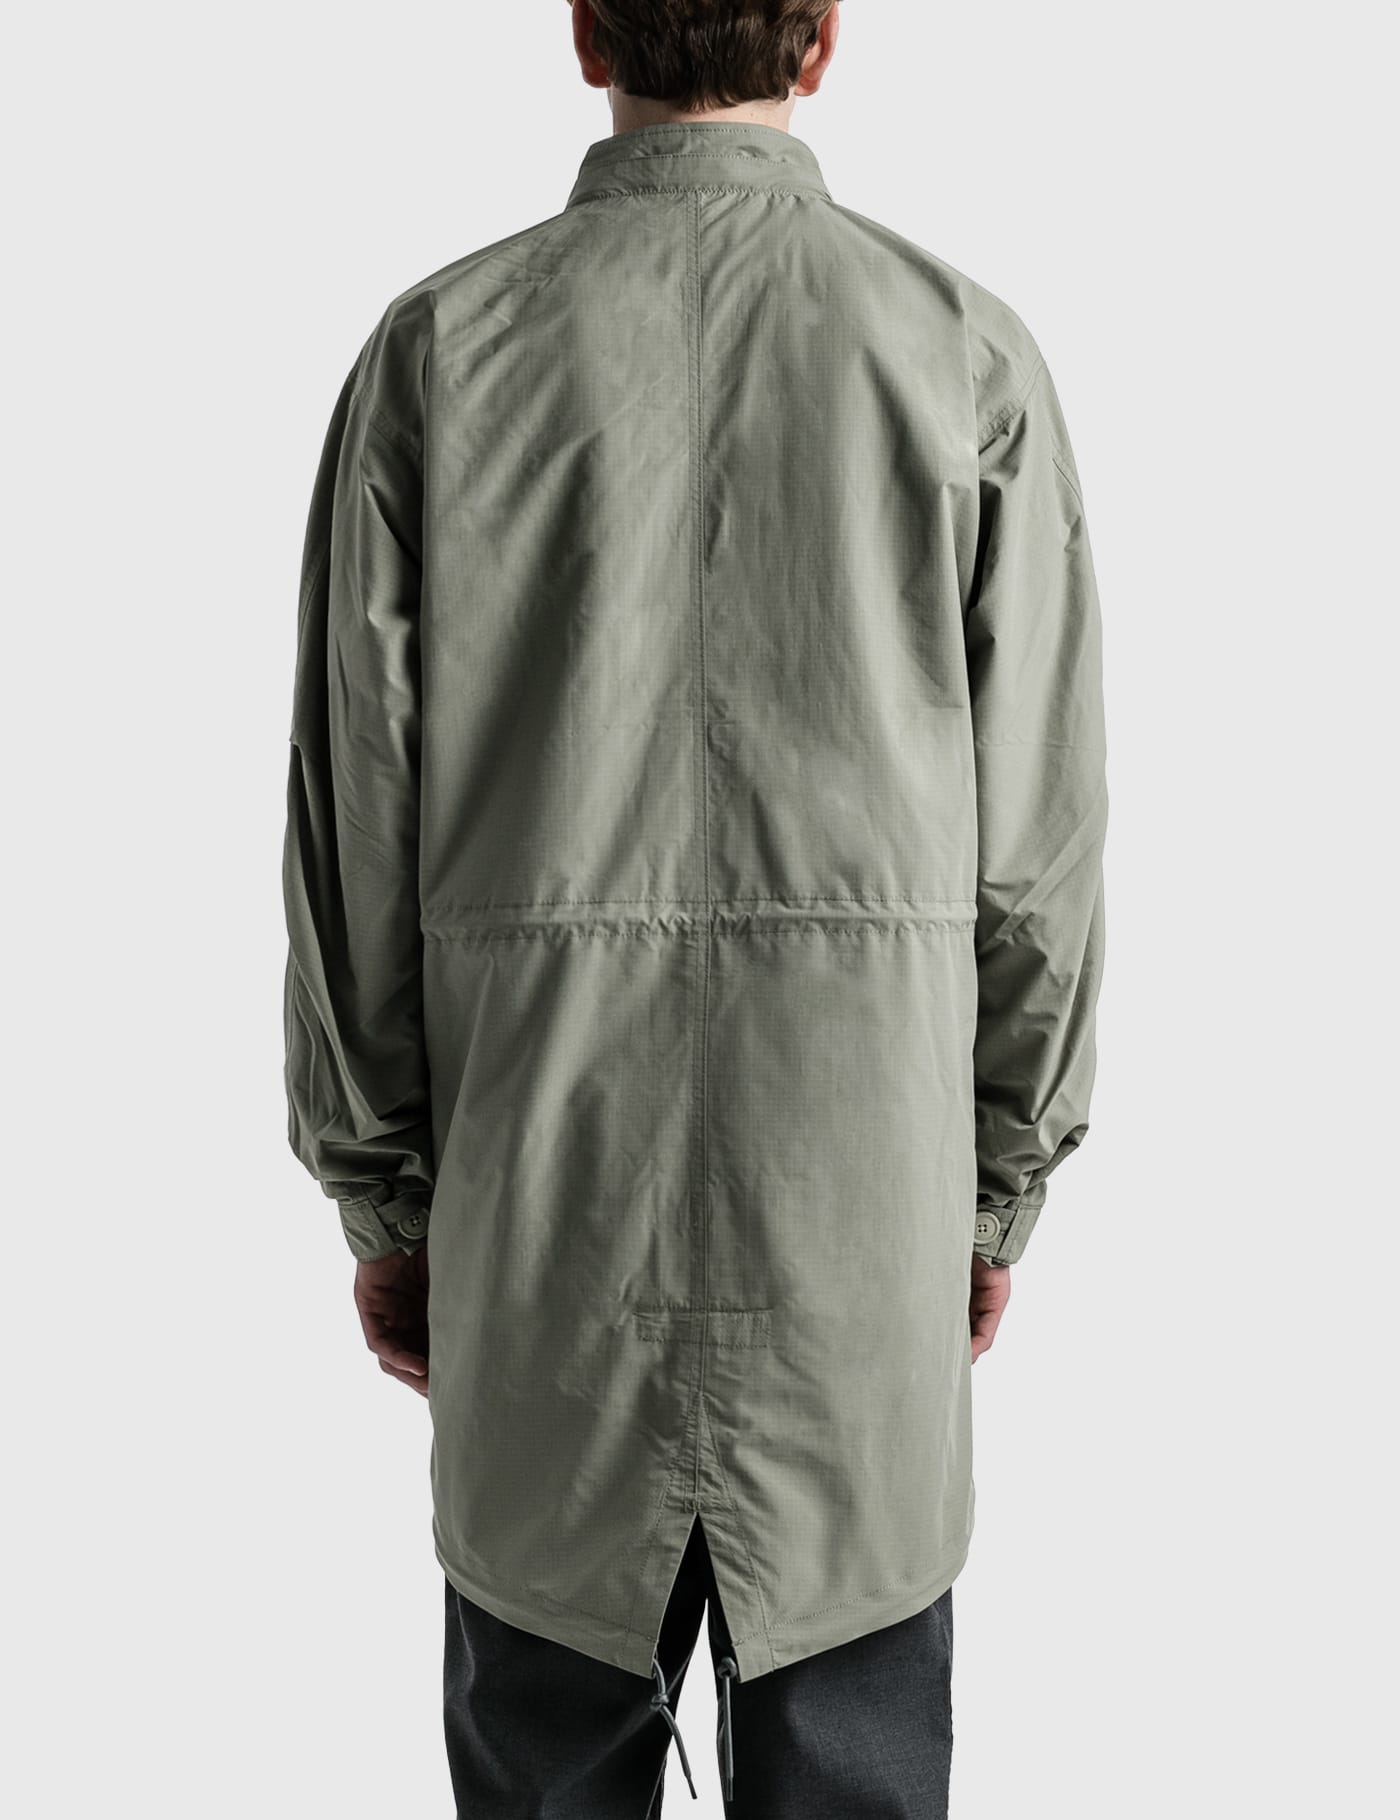 Wild Things - DICROS® Rip Field Parka | HBX - Globally Curated 